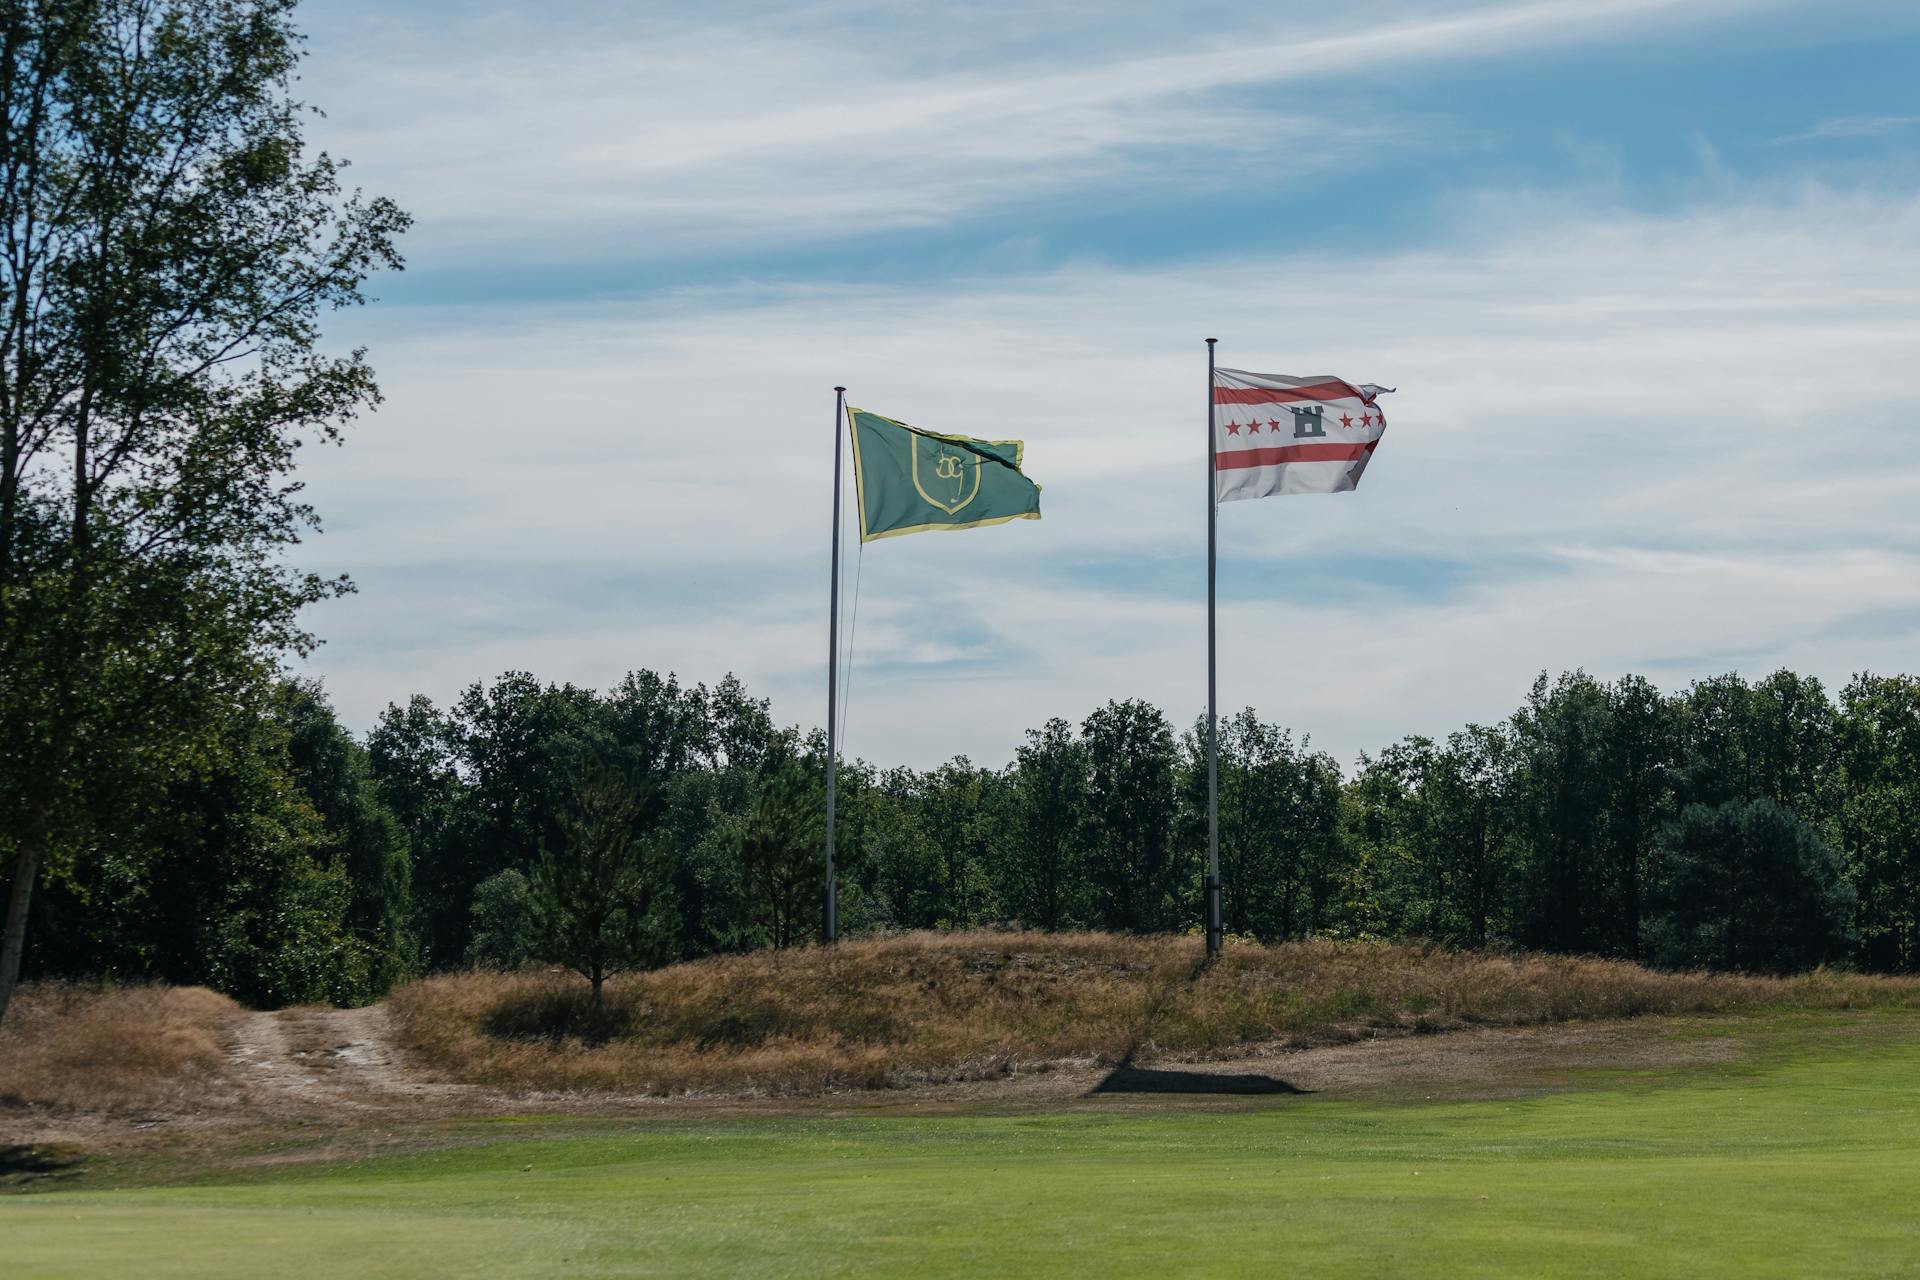 Next to the iconic green flag of the golf club, you'll see the Flag of Drenthe, reaching all the way back to 1947. Source: Drentse Golfclub De Gelpenberg